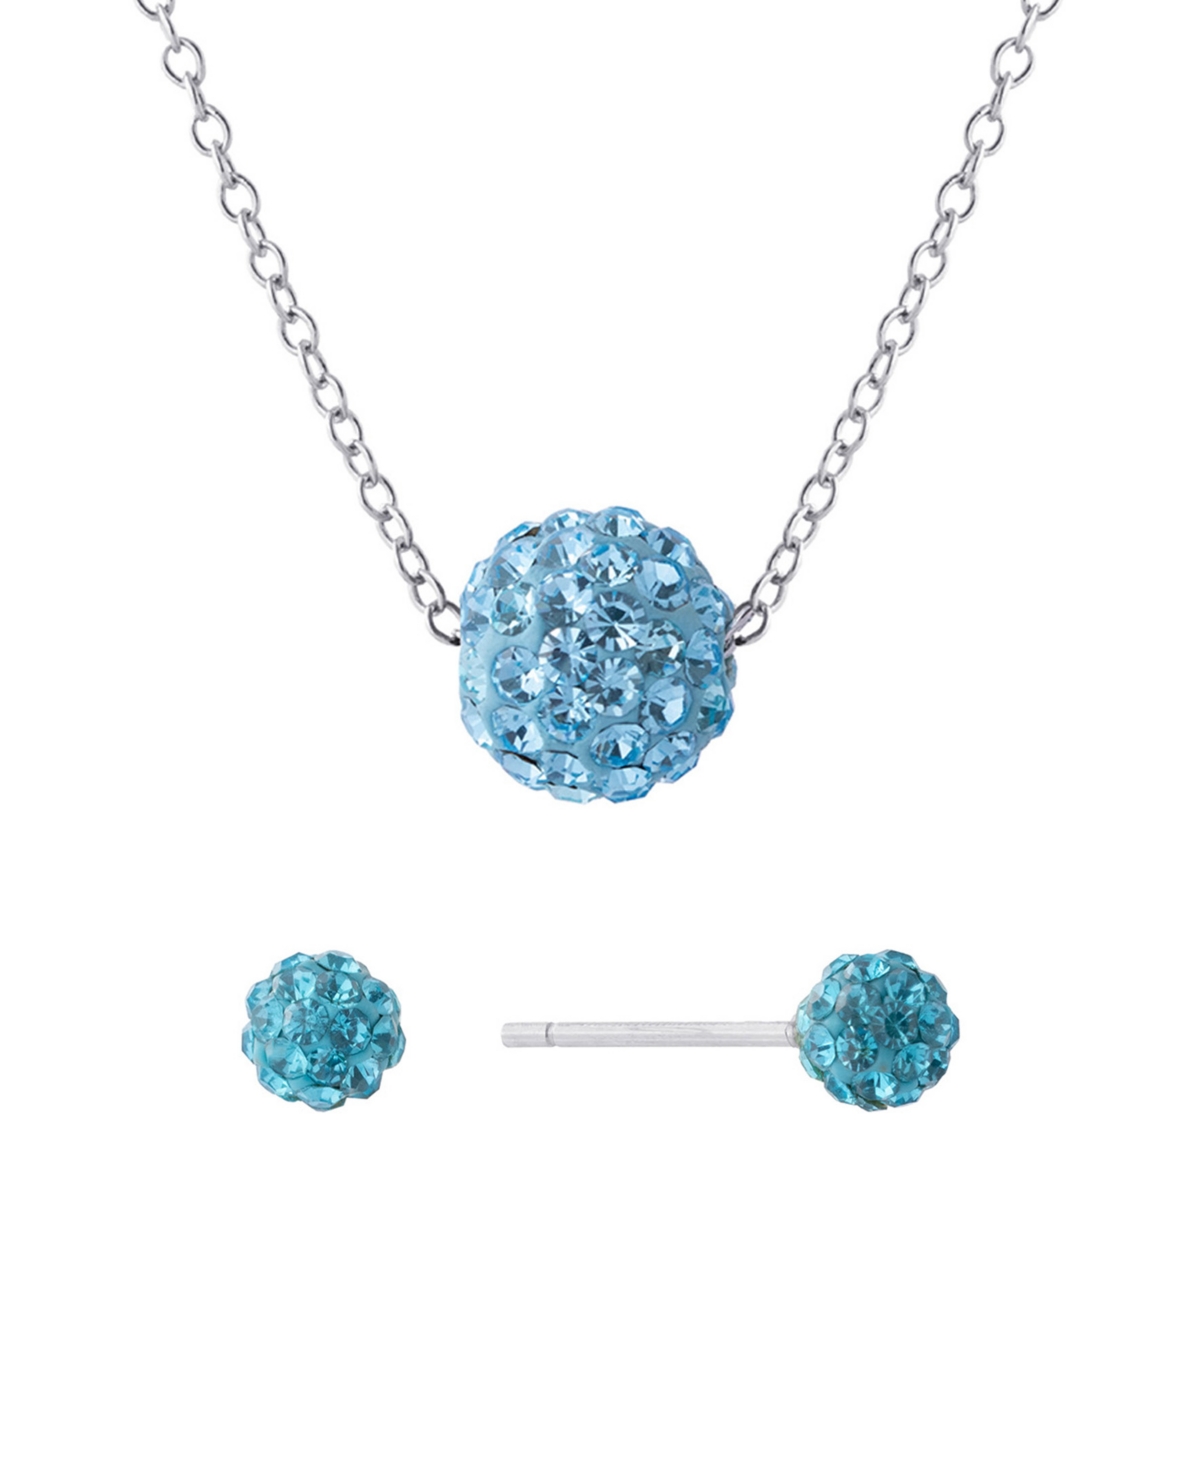 Giani Bernini Gianni Bernini 2-piece Clear Crystal Pave Ball Stud Necklace Set (1.2 Ct. T.w.) In Sterling Silver In Light Aqua